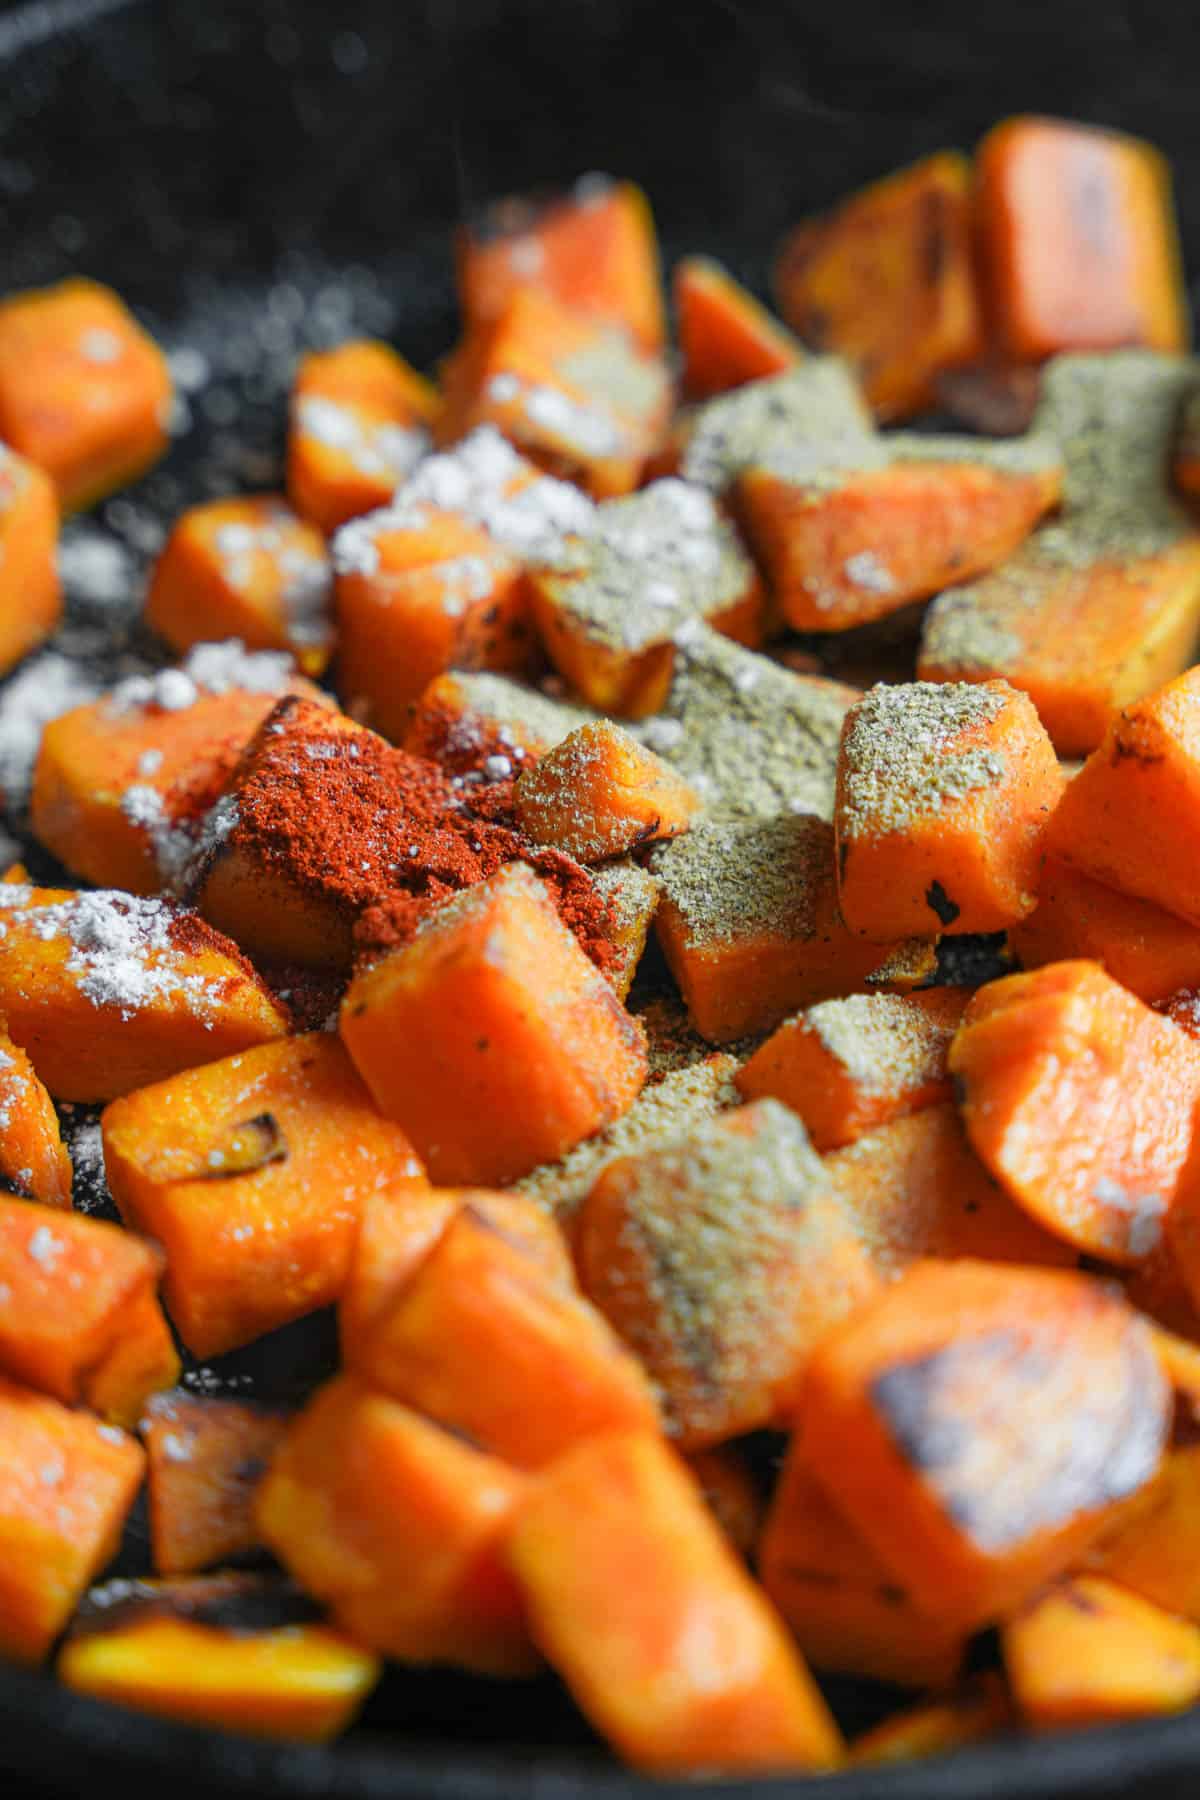 Chaat masala, chili powder and black salt are added to the cooking sweet potatoes.